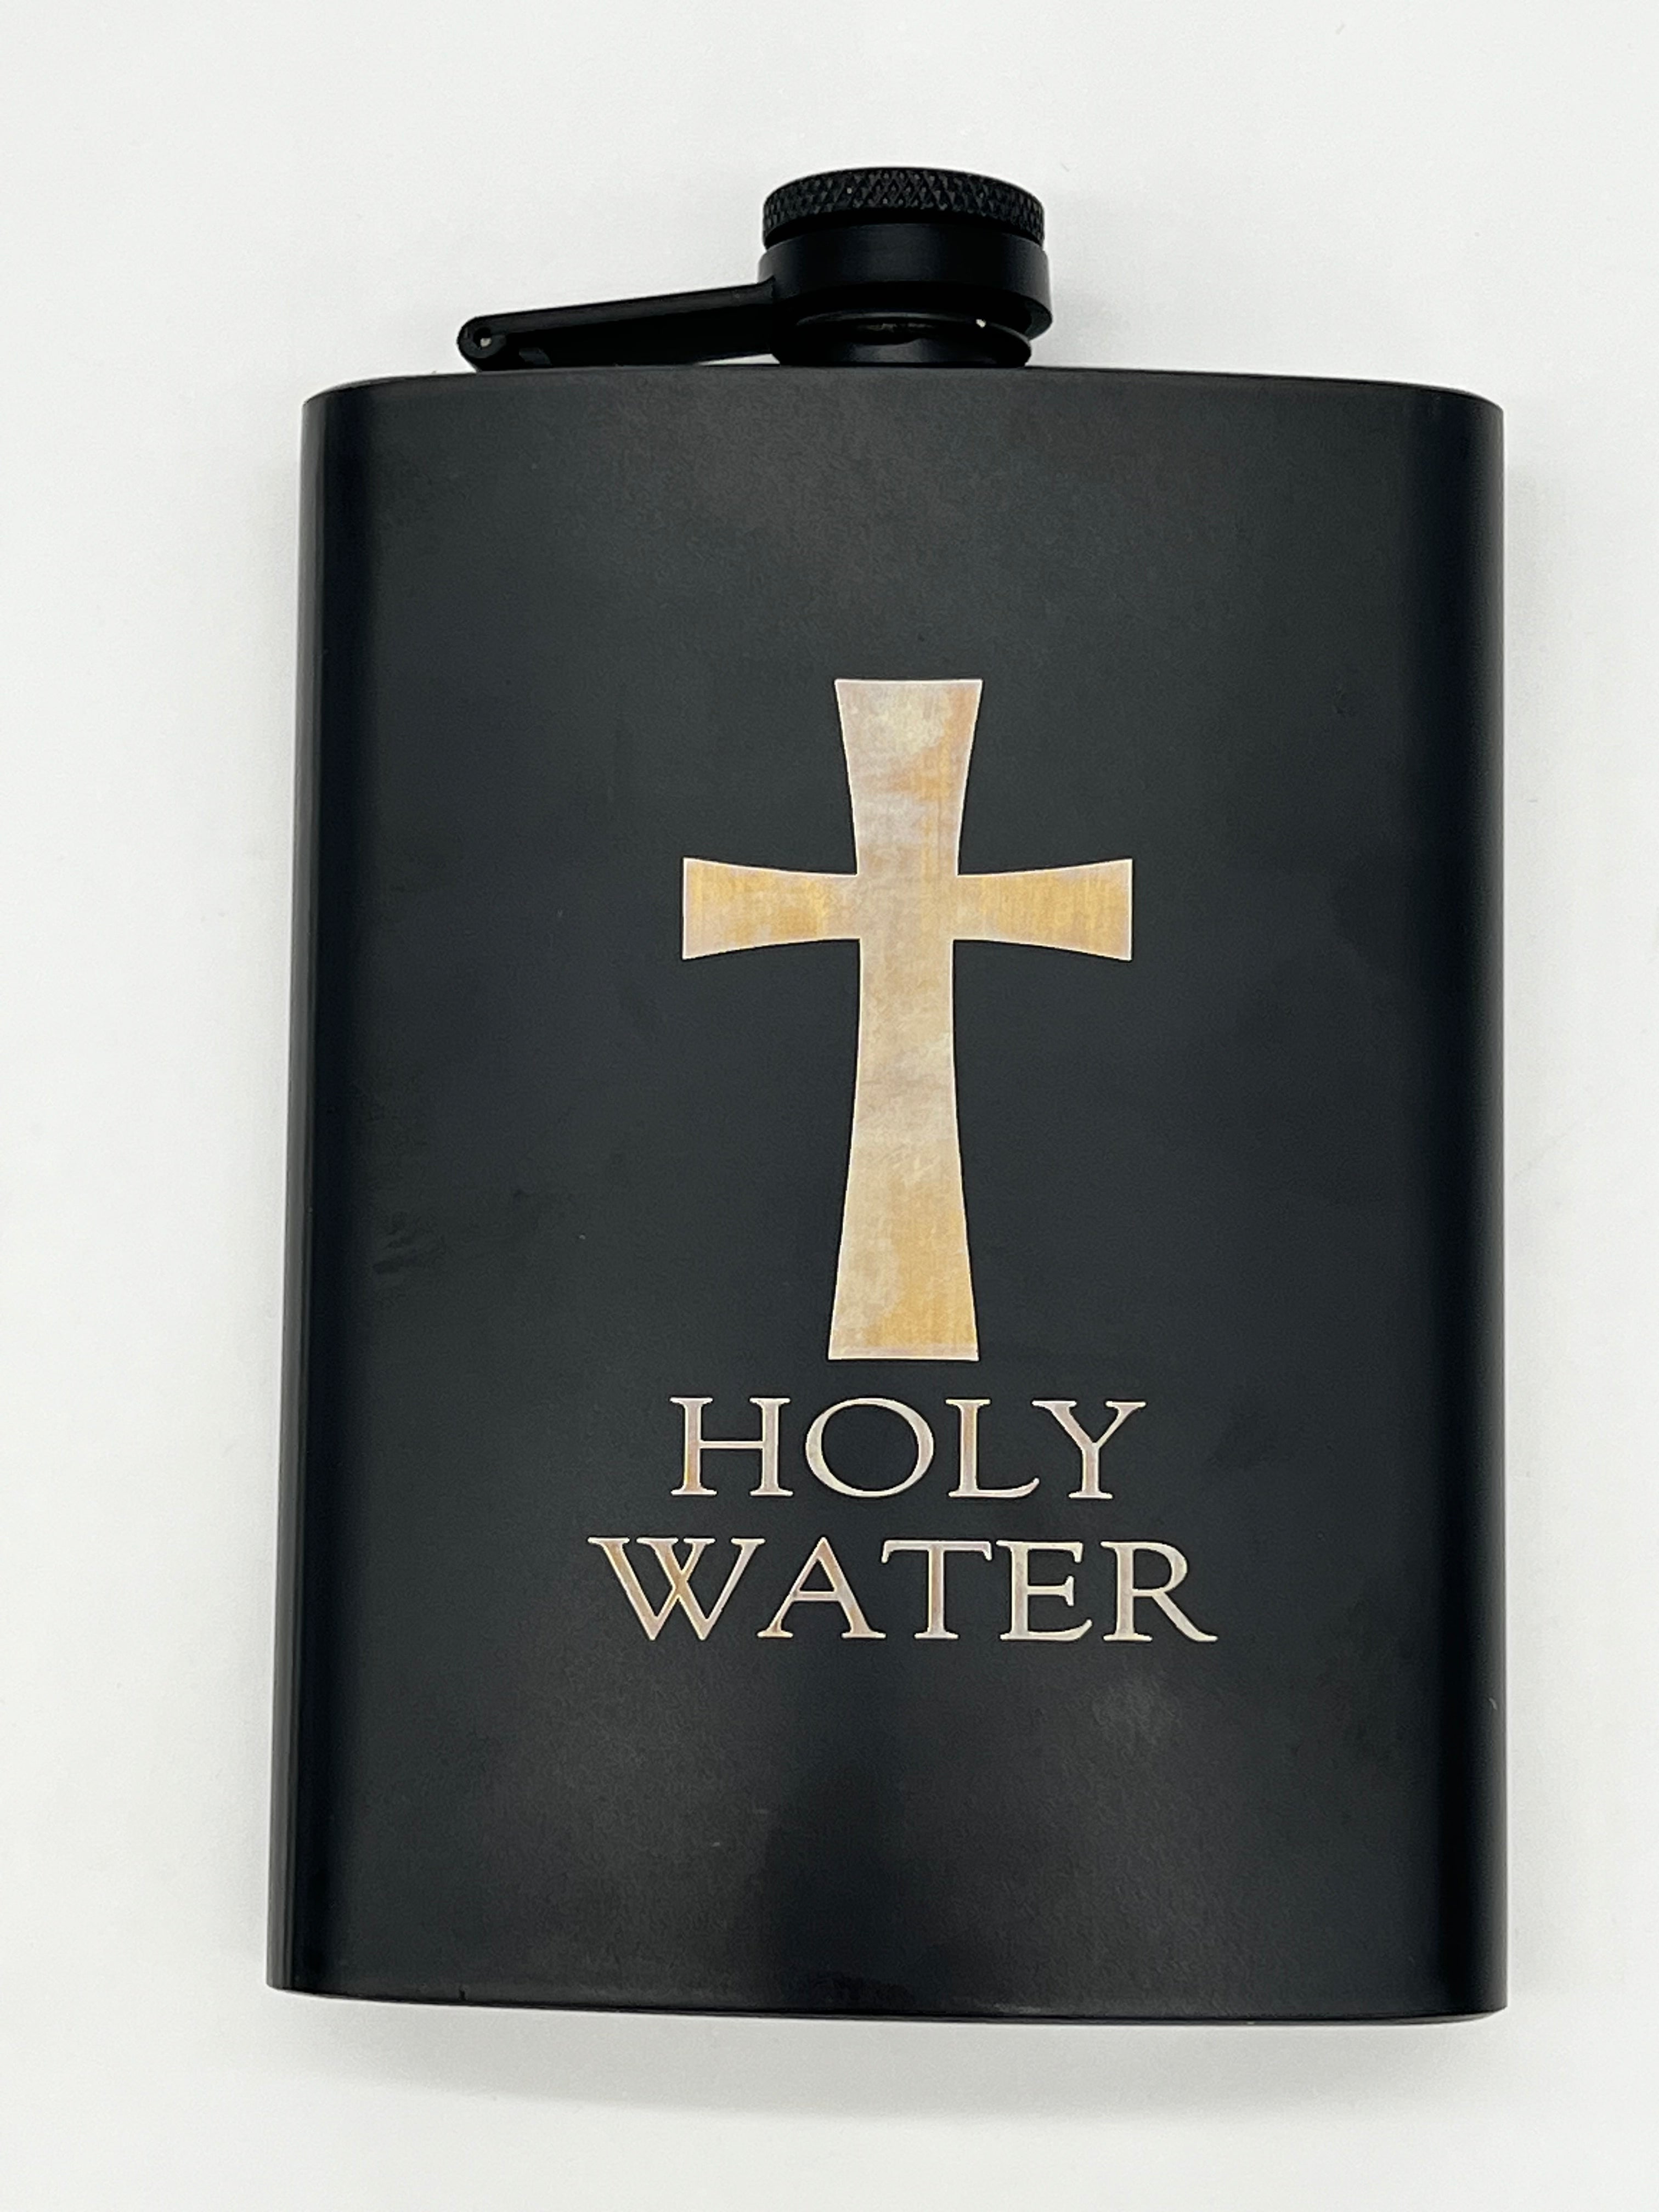 Zeman Woodcrafts Engraved Flask.  Design shows "Holy Water" and Cross.